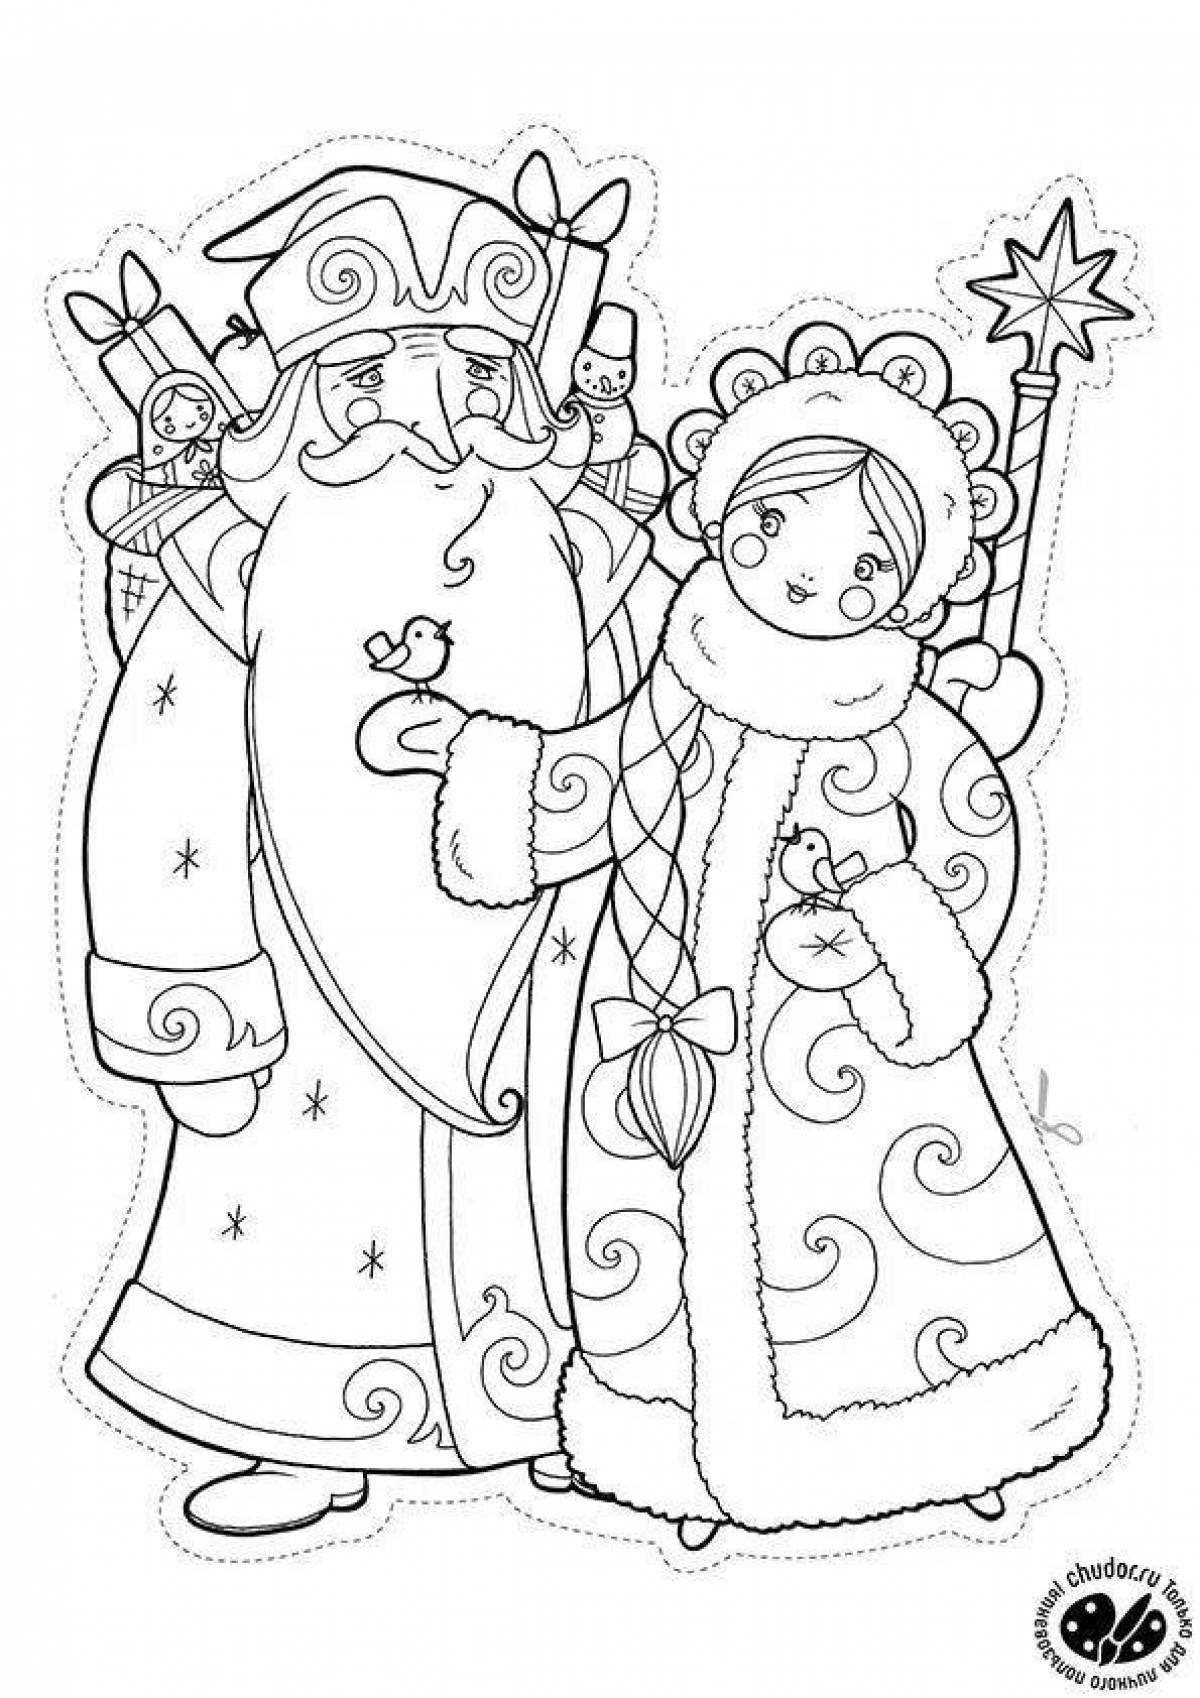 Cute Santa Claus and Snow Maiden coloring book